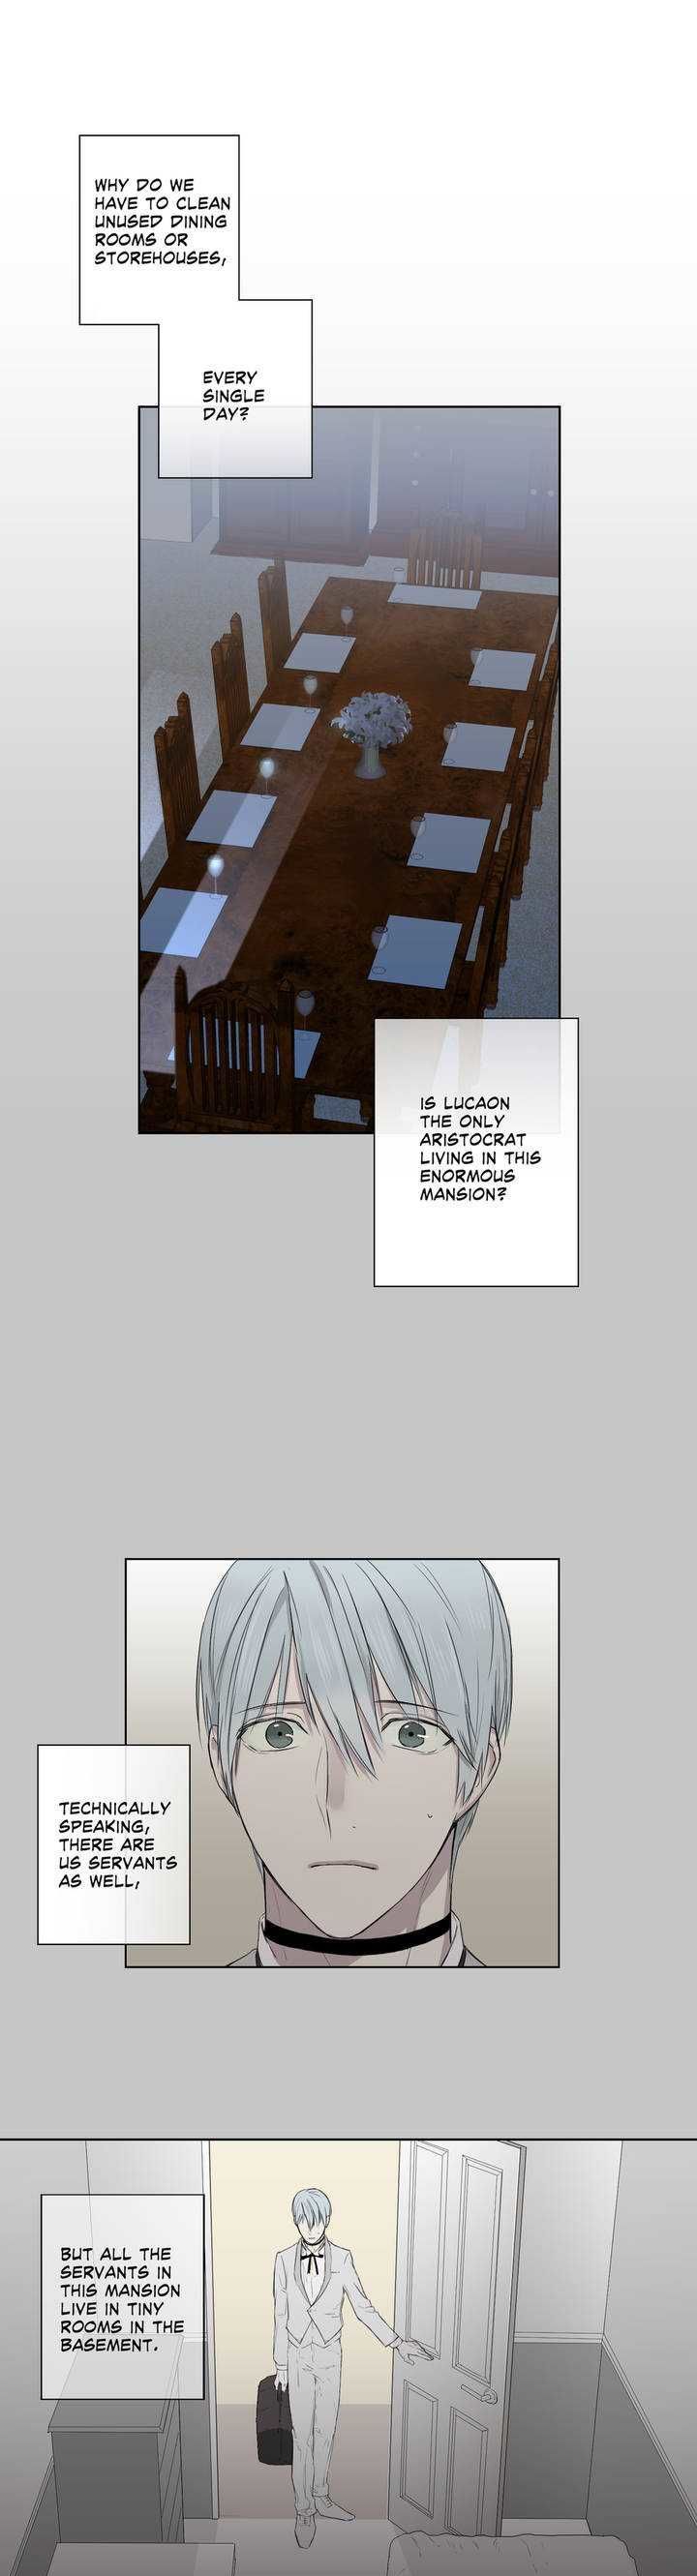 Royal Servant - Chapter 2 Page 26